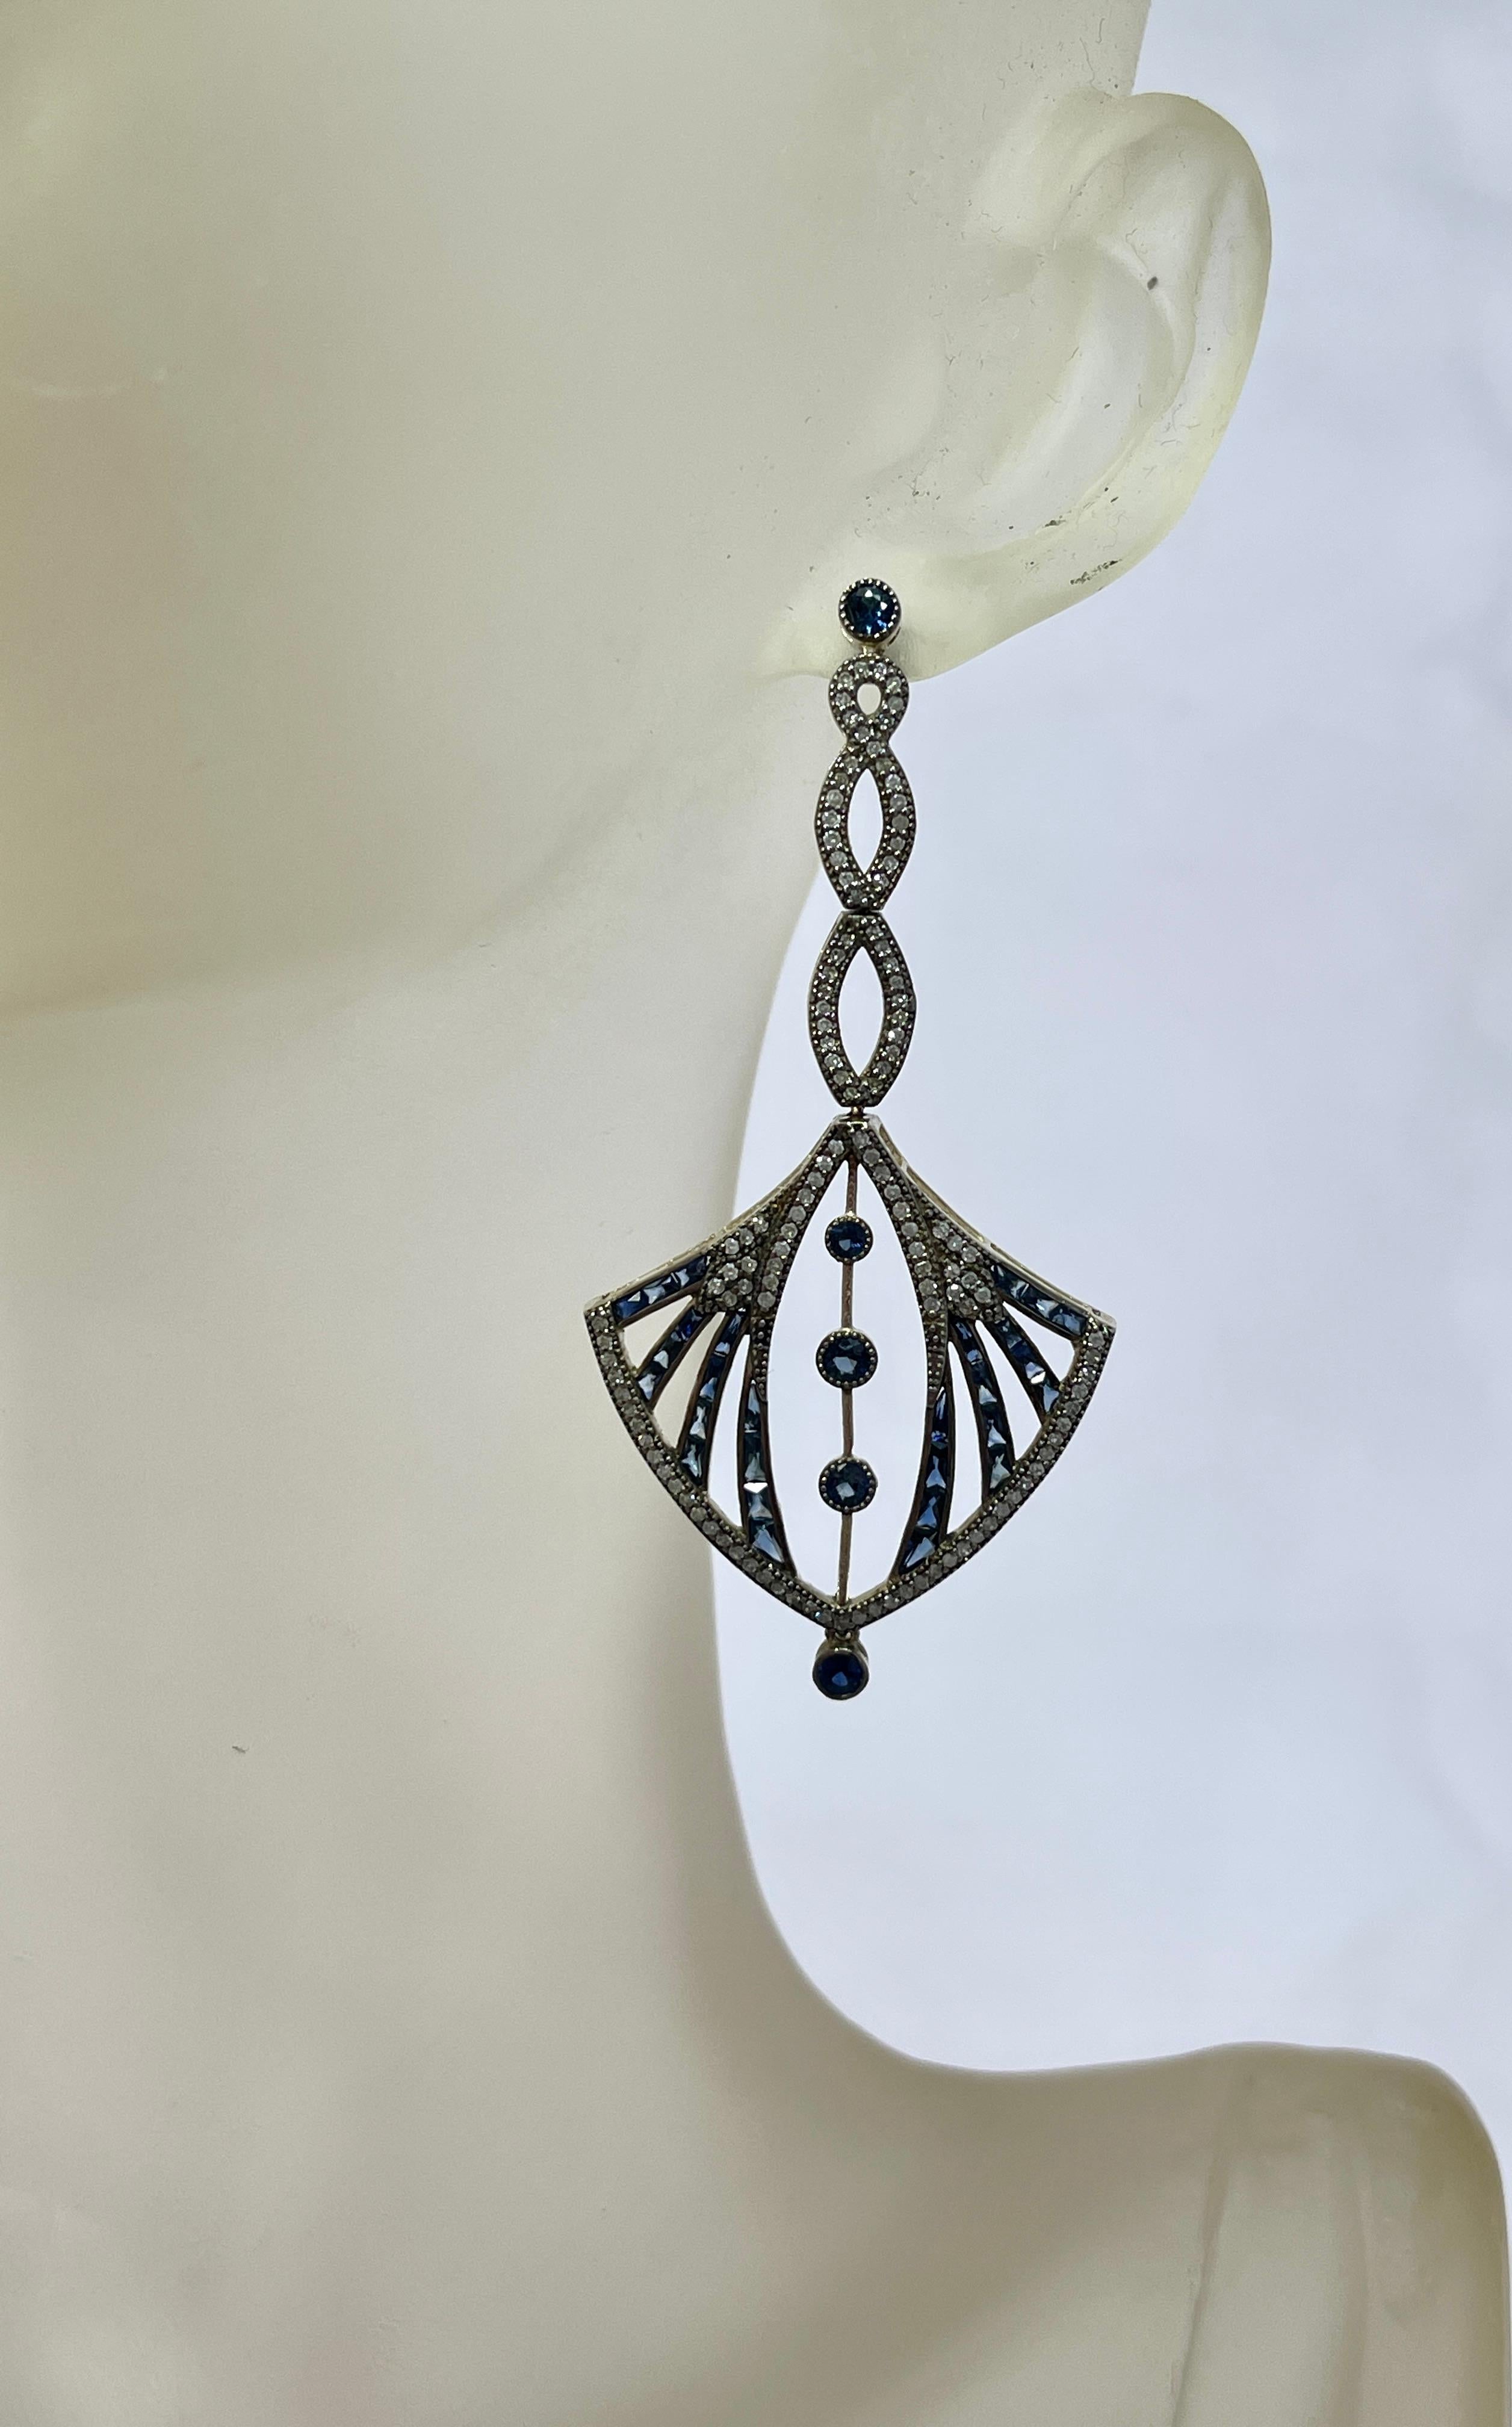 These earrings are fit for ‘Your Inner Flapper�’!!
They feature Art Deco Styling and are very special indeed.
The design incorporates the loved Art Deco Fan, which was a true feature of the time.
The earrings are set with Natural Sapphires and